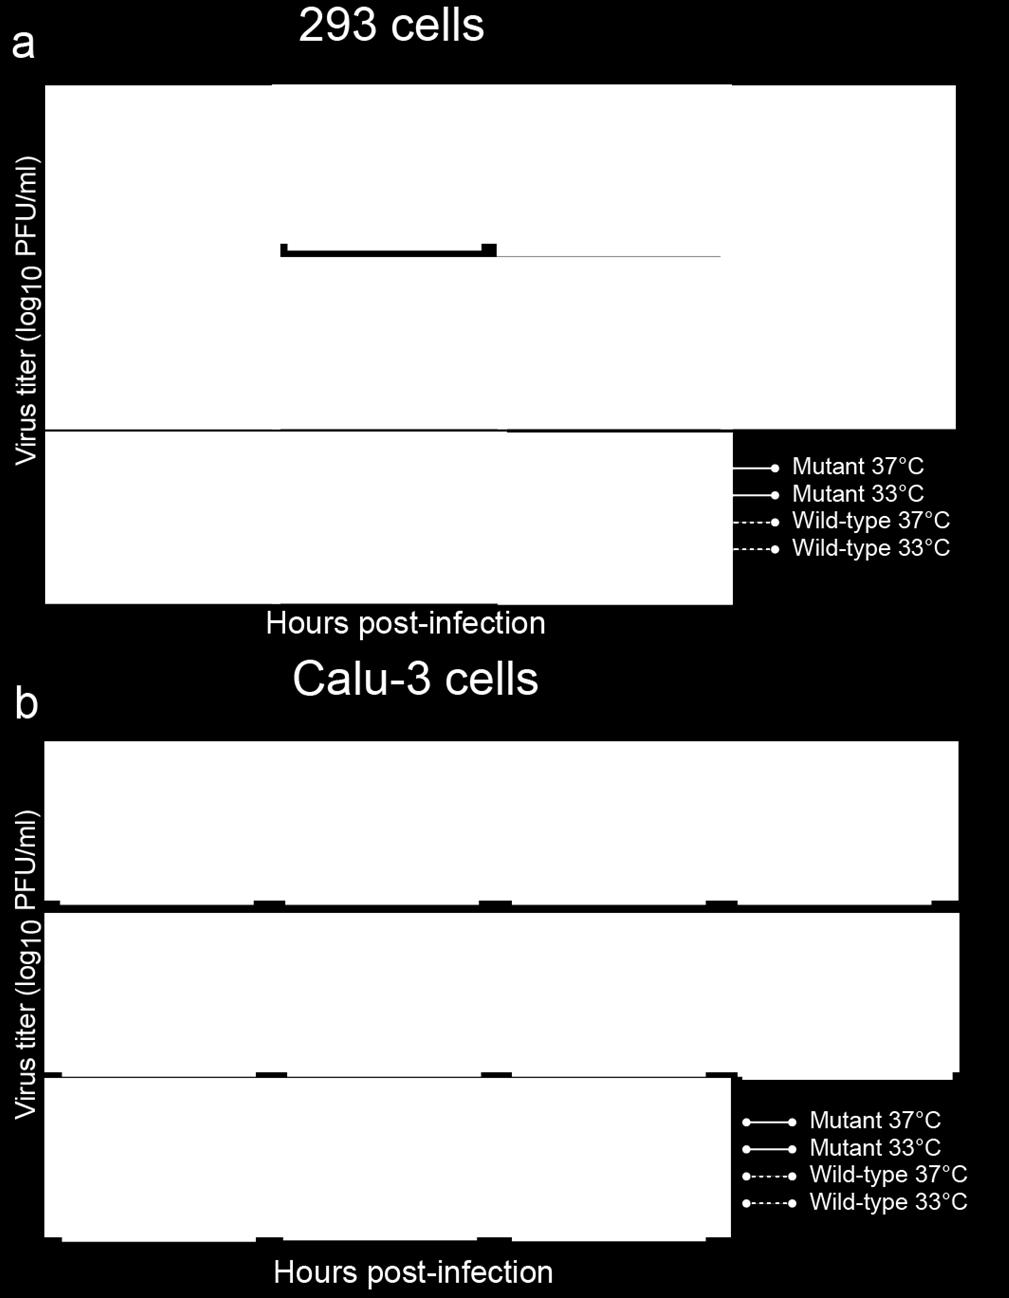 Supplementary Figure 2. Growth kinetics of mutant TY93/H5N1 viruses in 293 and Calu-3 cells. Human 293 (a) or Calu-3 (b) cells were infected with virus at an MOI of 0.